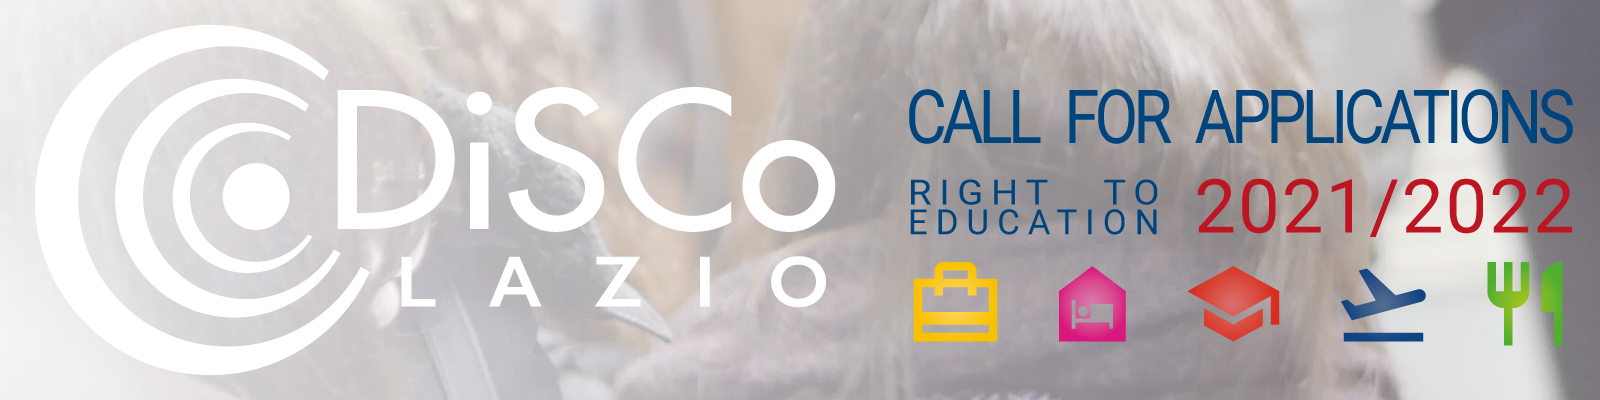 Call for Applications - Right to Education 2021/2022